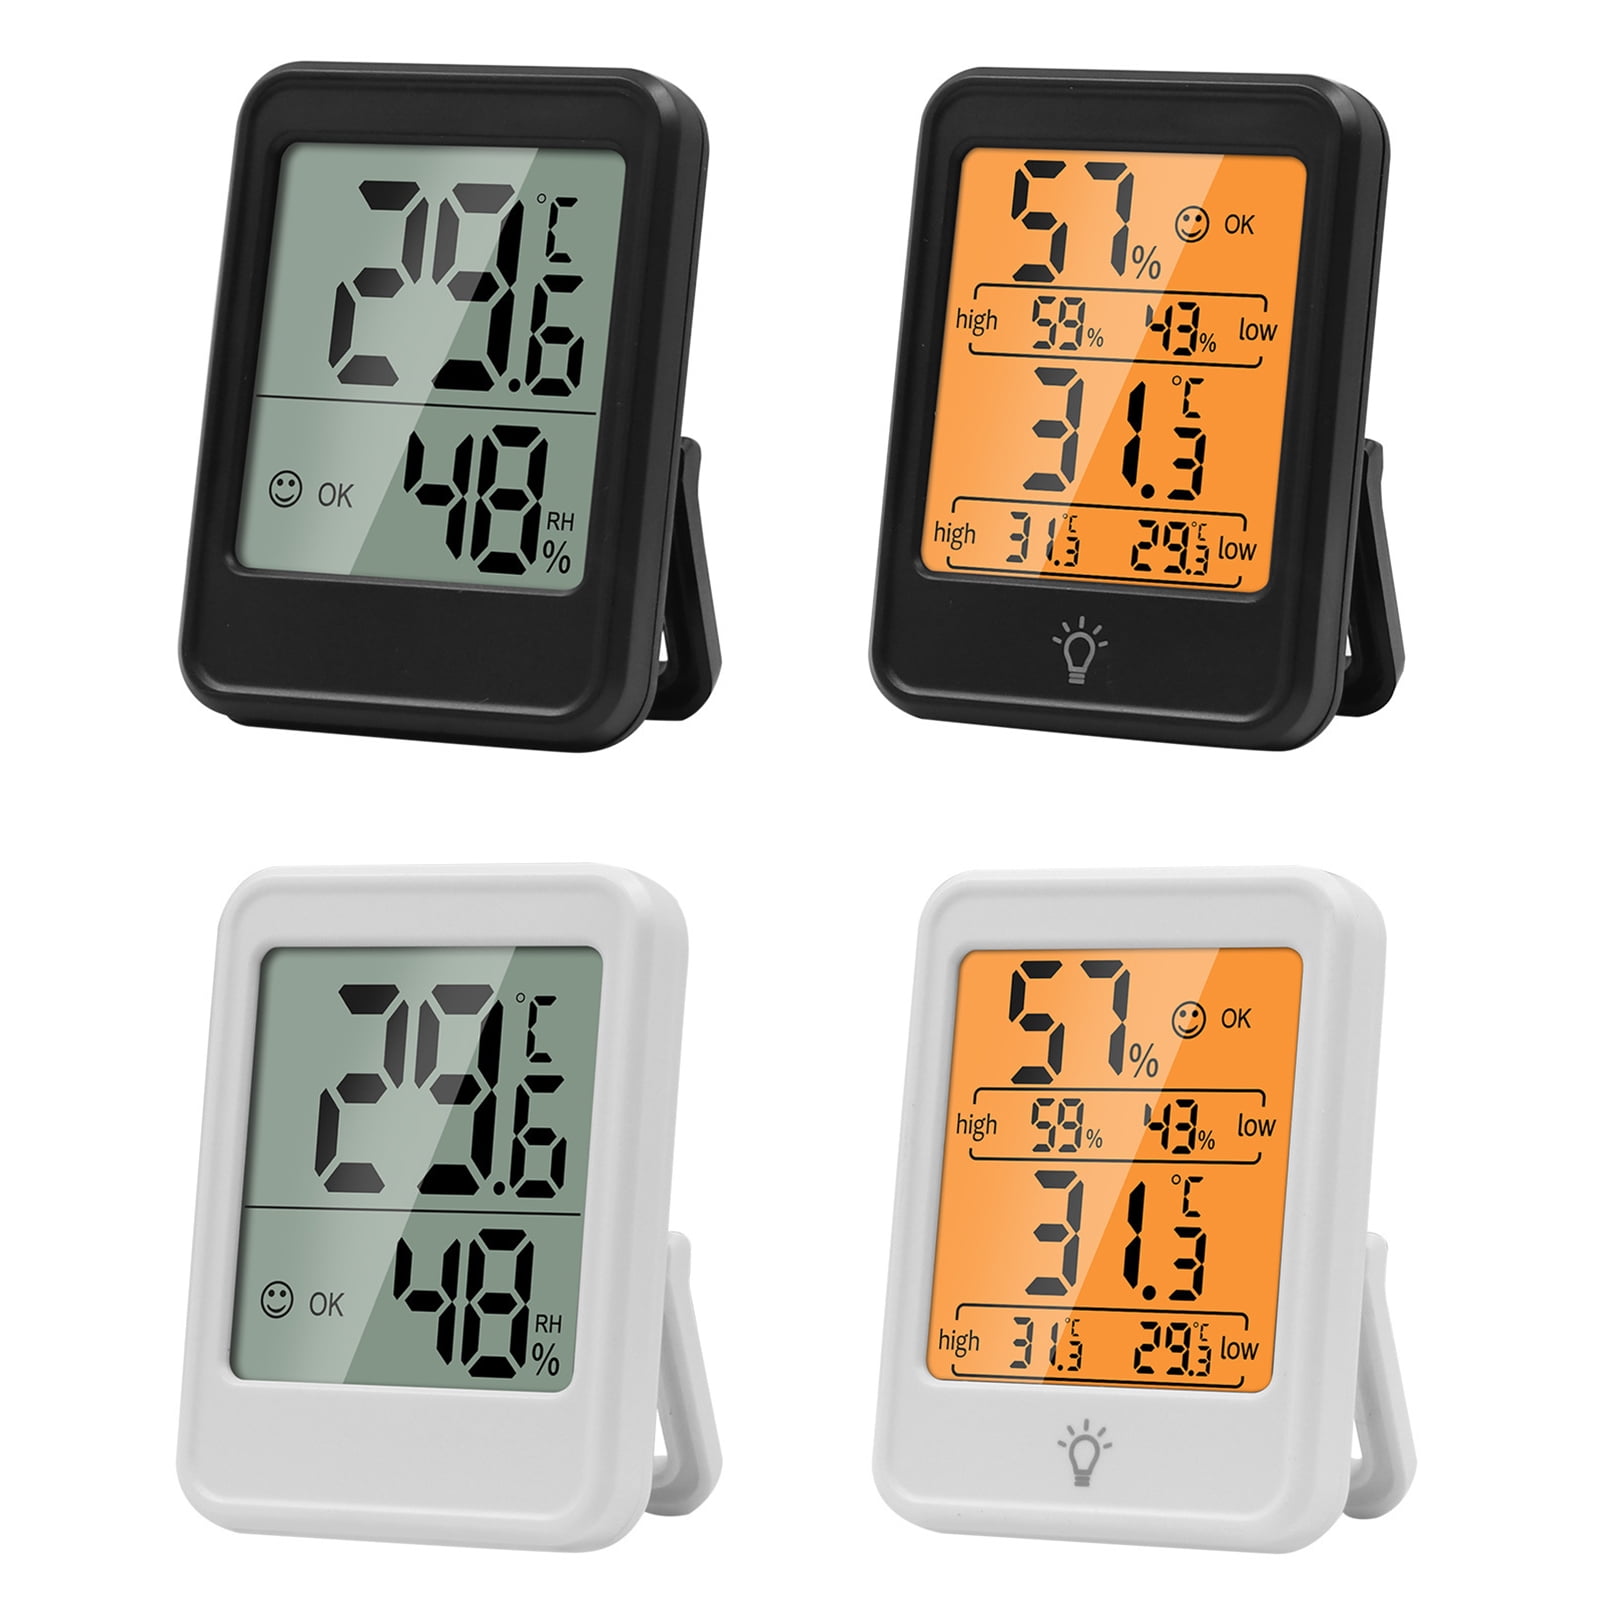 10 of the best room thermometers